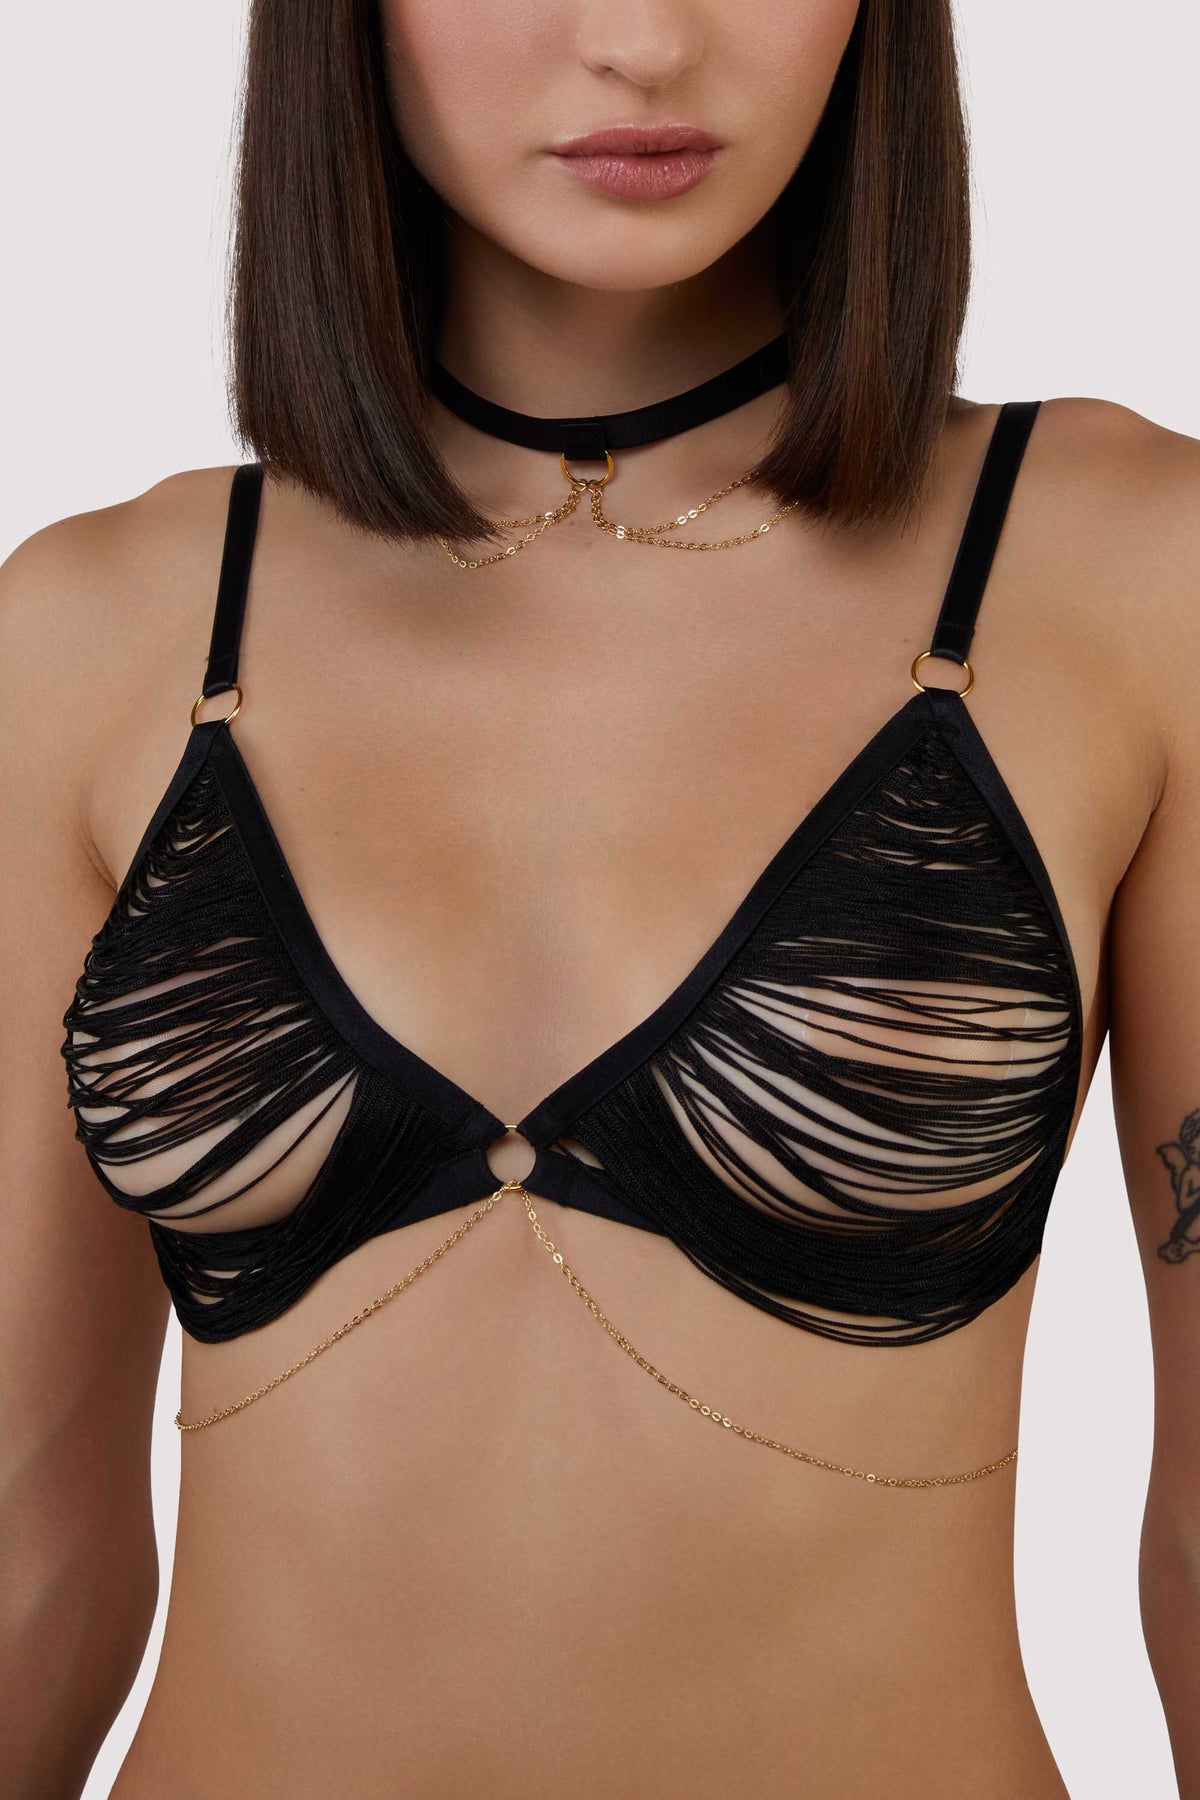 nayomi - NAJMA FRONTLESS BRA: NEW AND REVOLUTIONARY Once an exclusive  celebrity fashion accessory, the Najma Frontless Bra is perfect for low cut  dresses and for creating a dramatic push up effect.